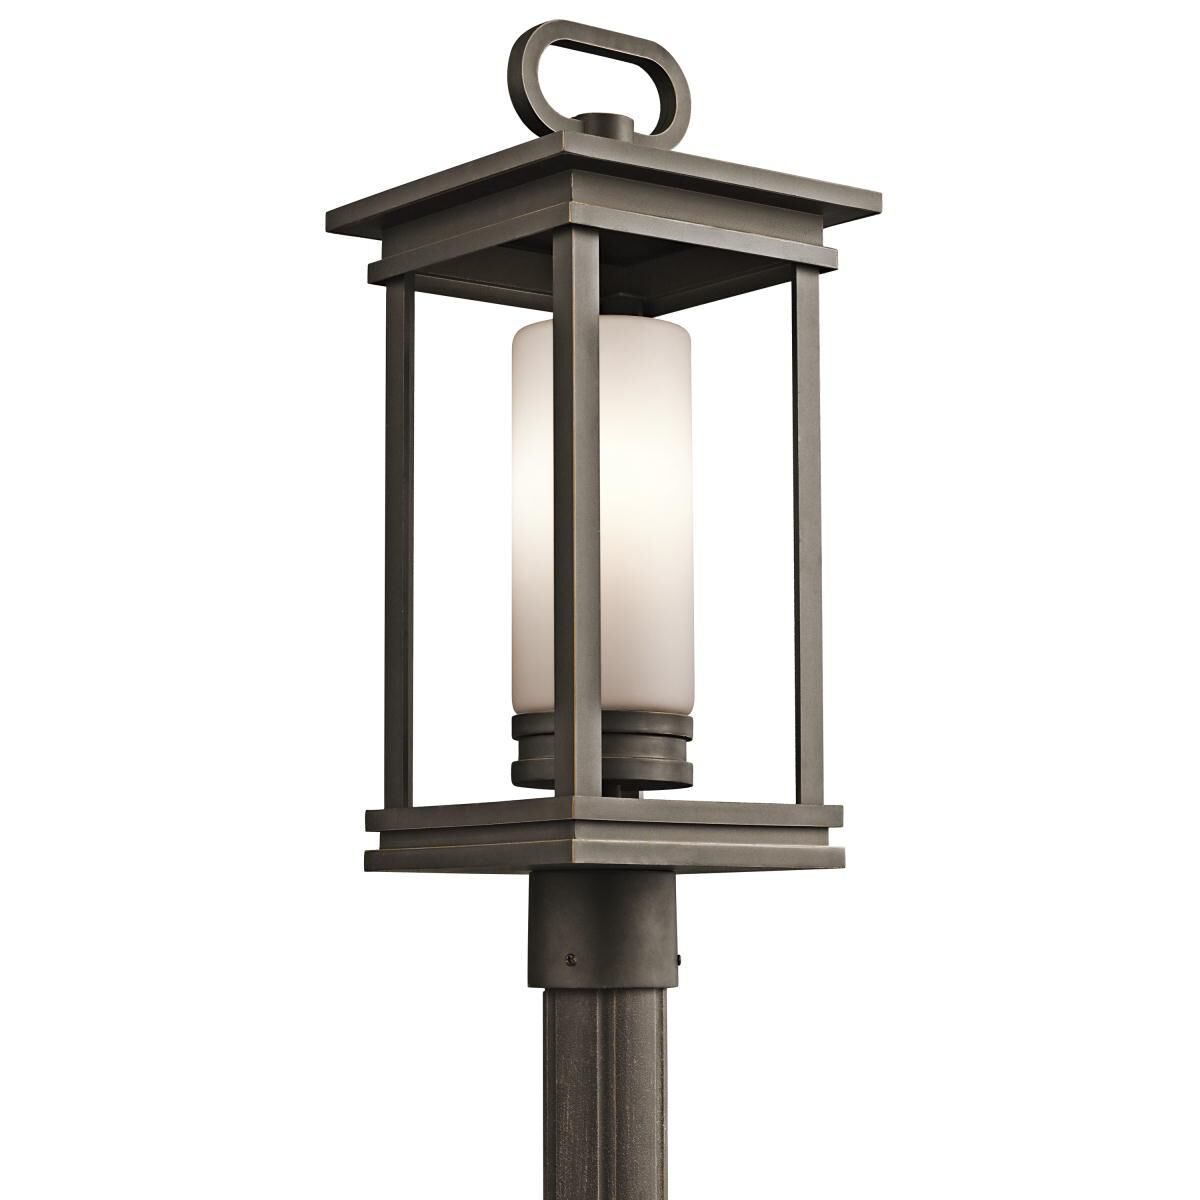 Photos - Floodlight / Garden Lamps Kichler Lighting South Hope 21 Inch Tall 1 Light Outdoor Post Lamp South H 